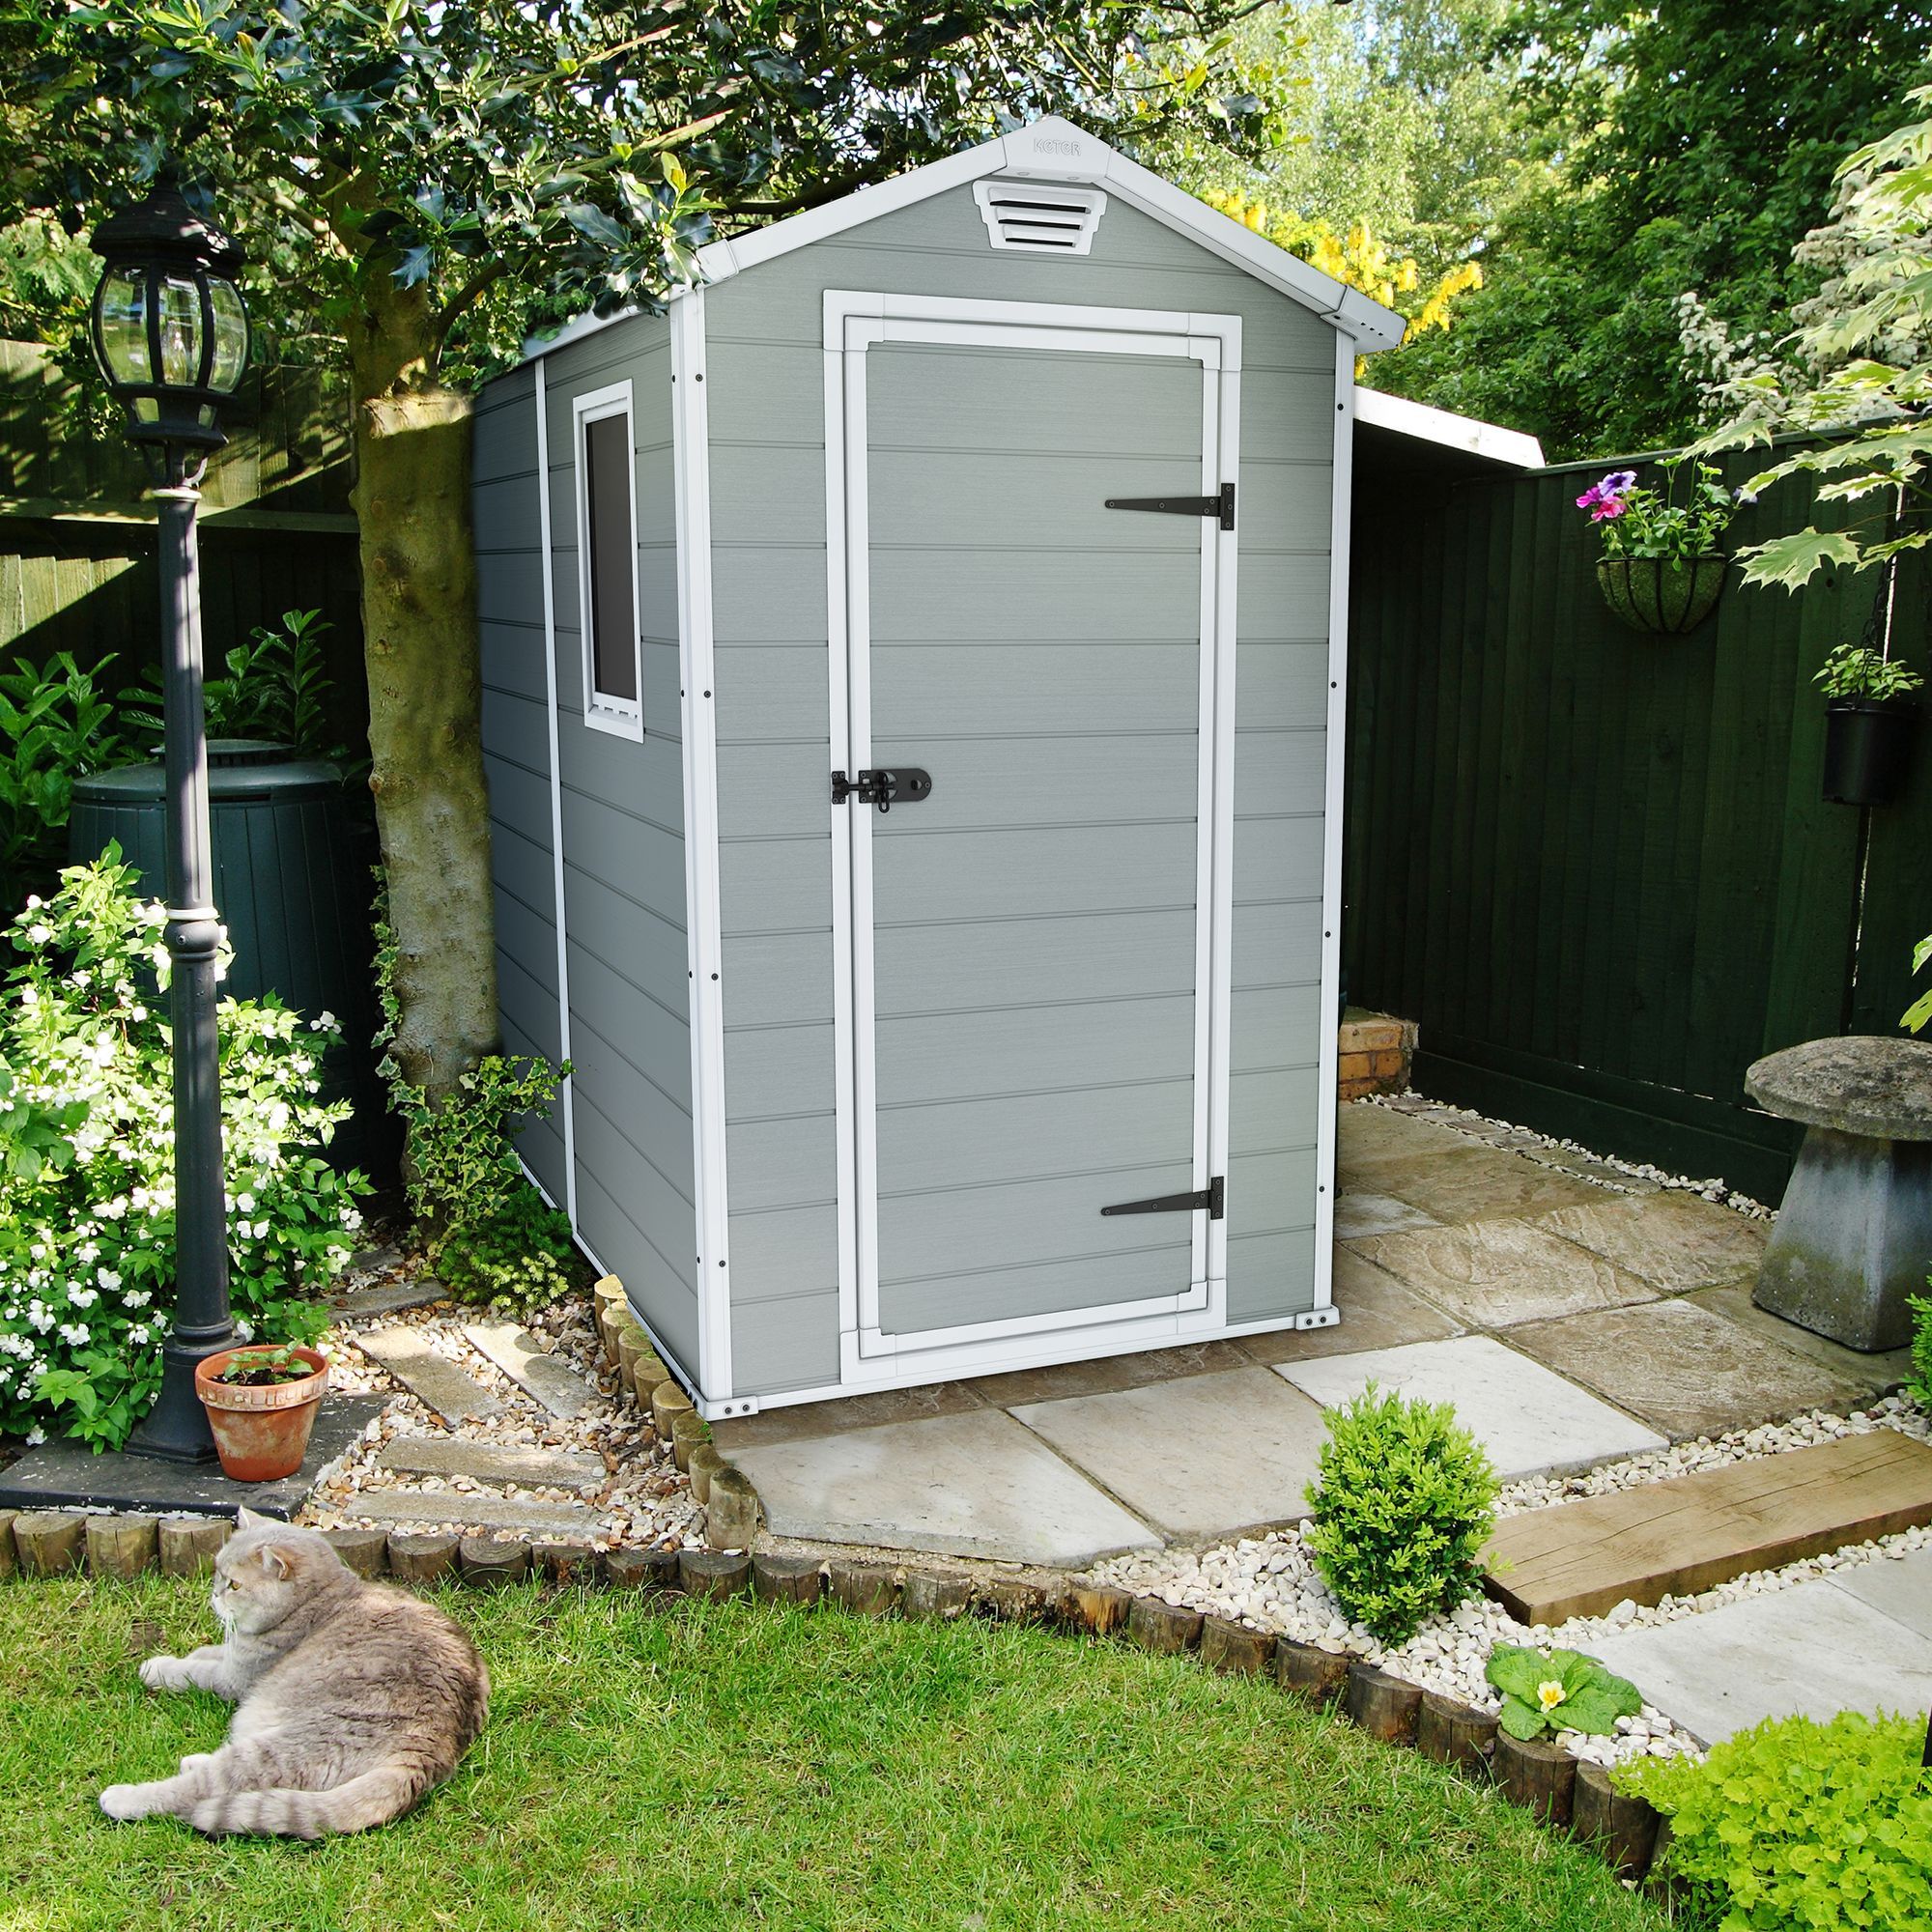 6x4 Manor Apex Plastic Shed | Departments | TradePoint